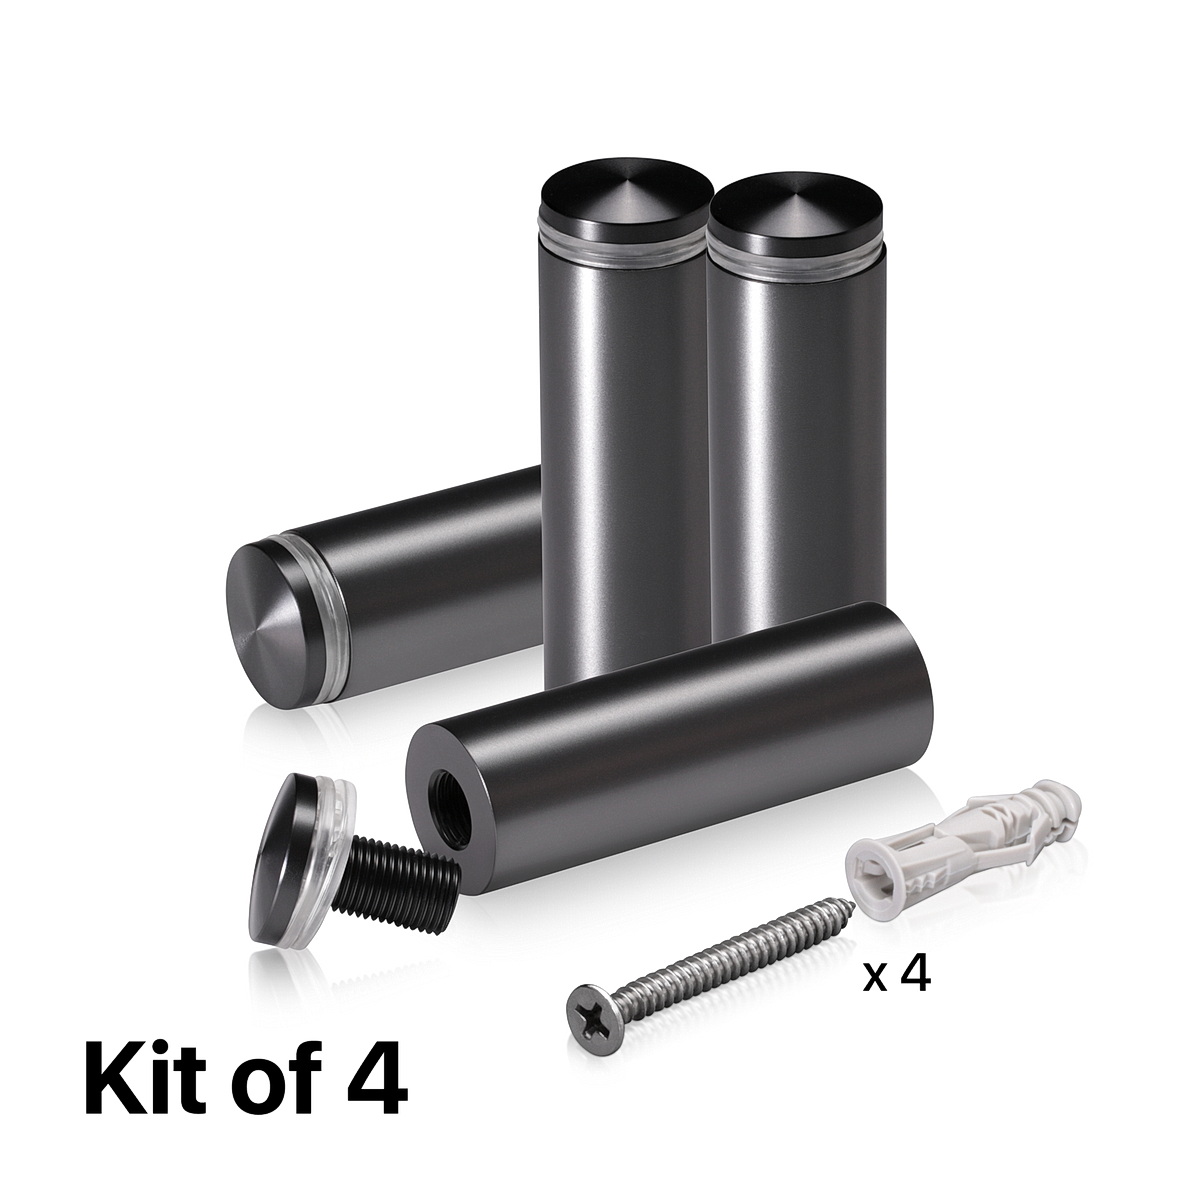 (Set of 4) 7/8'' Diameter X 2-1/2'' Barrel Length, Aluminum Rounded Head Standoffs, Titanium Anodized Finish Standoff with (4) 2216Z Screws and (4) LANC1 Anchors for concrete or drywall (For Inside / Outside use) [Required Material Hole Size: 7/16'']